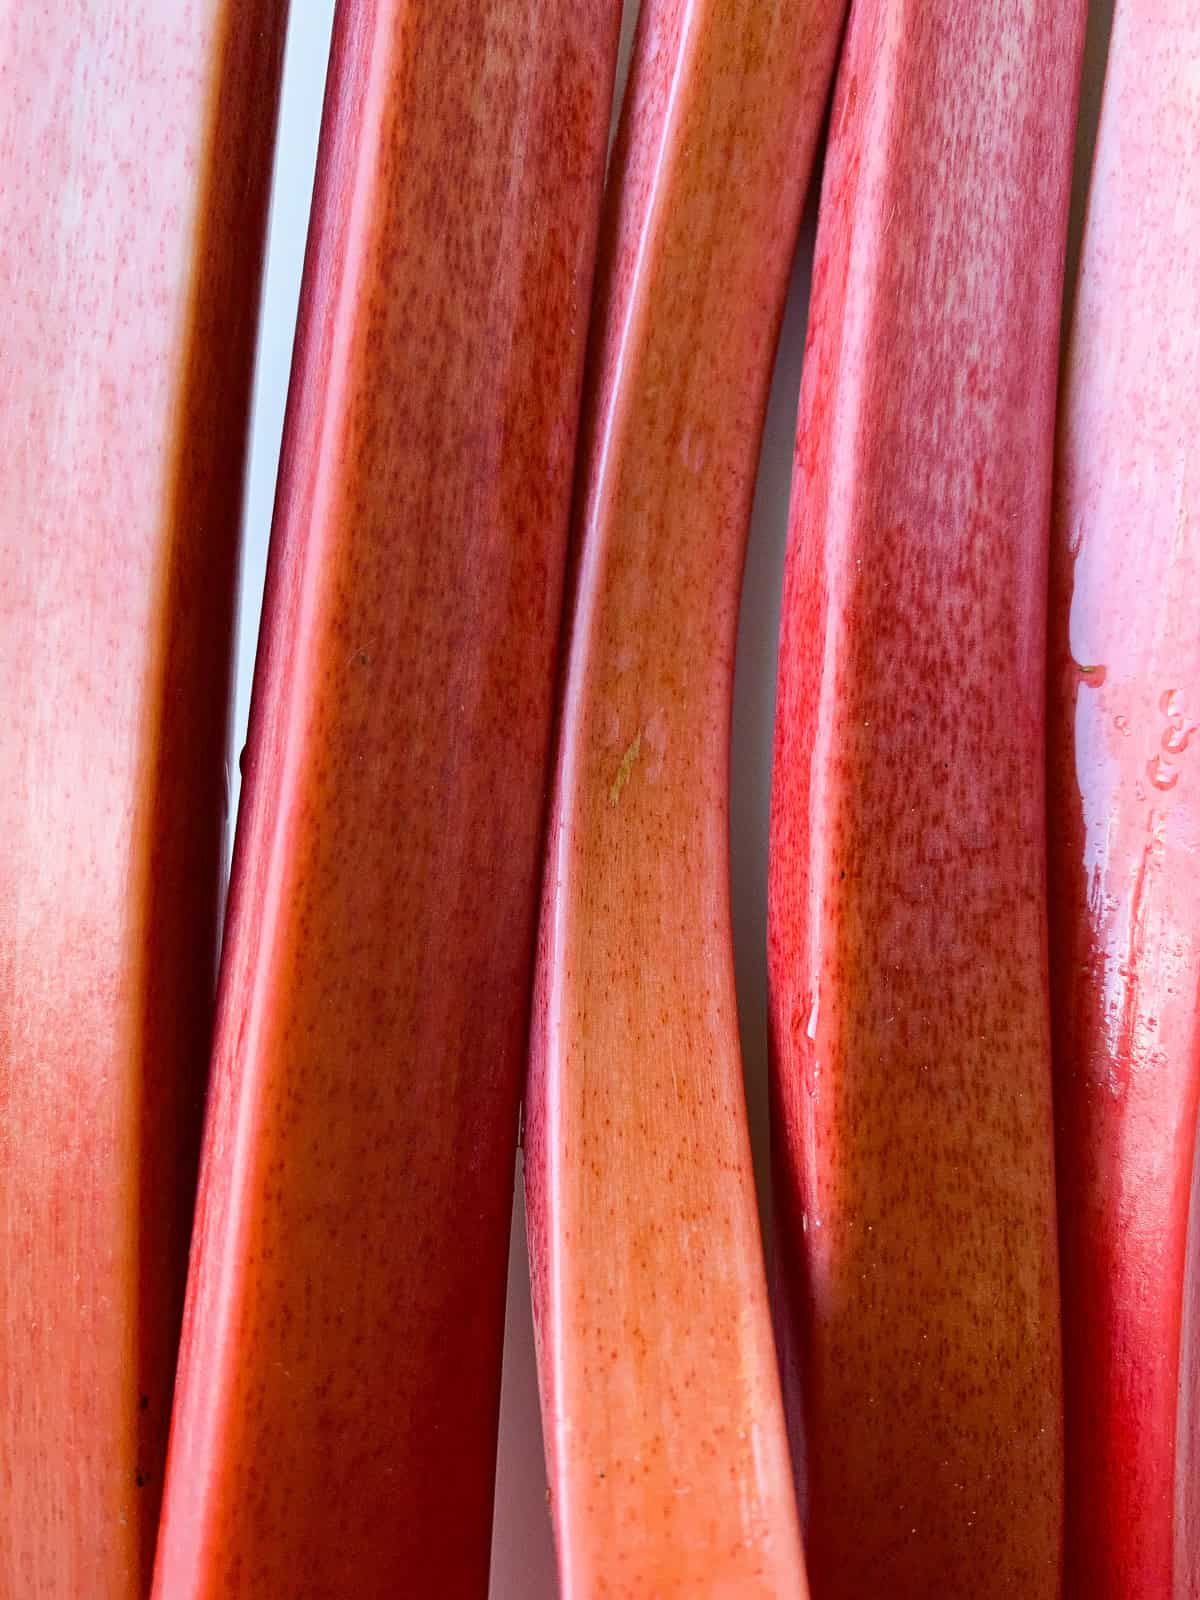 An image of the stalks of a bunch of rhubarb.